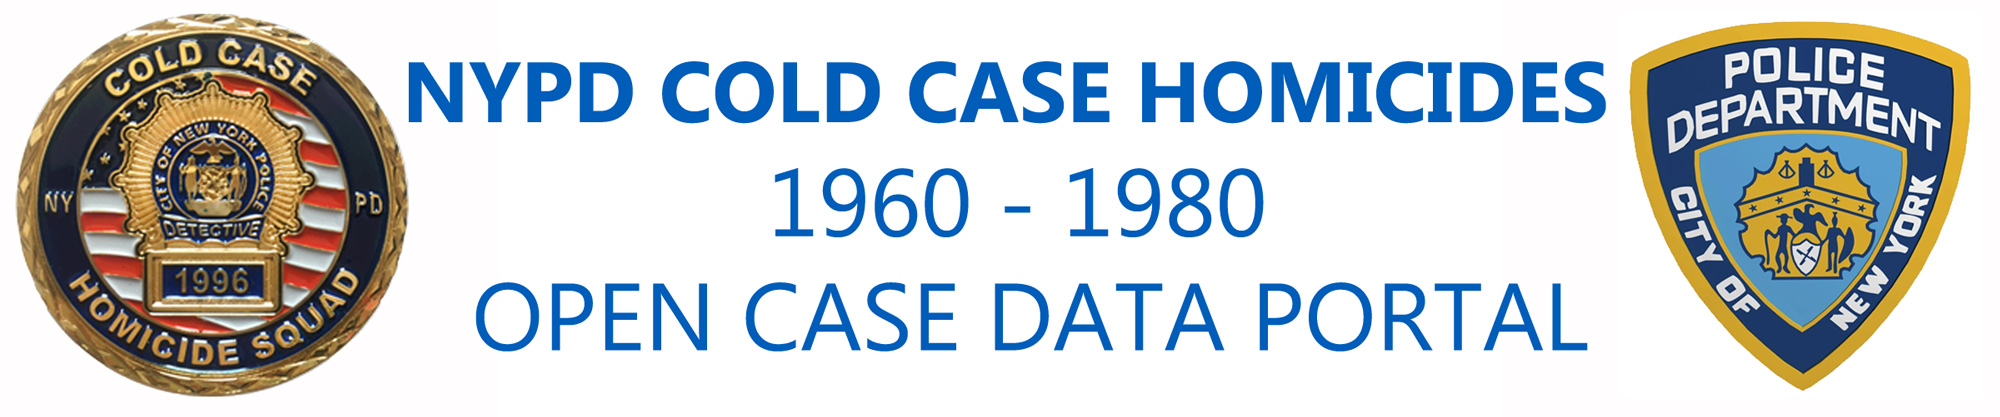 NYPD Cold Cases 1960 - 1980